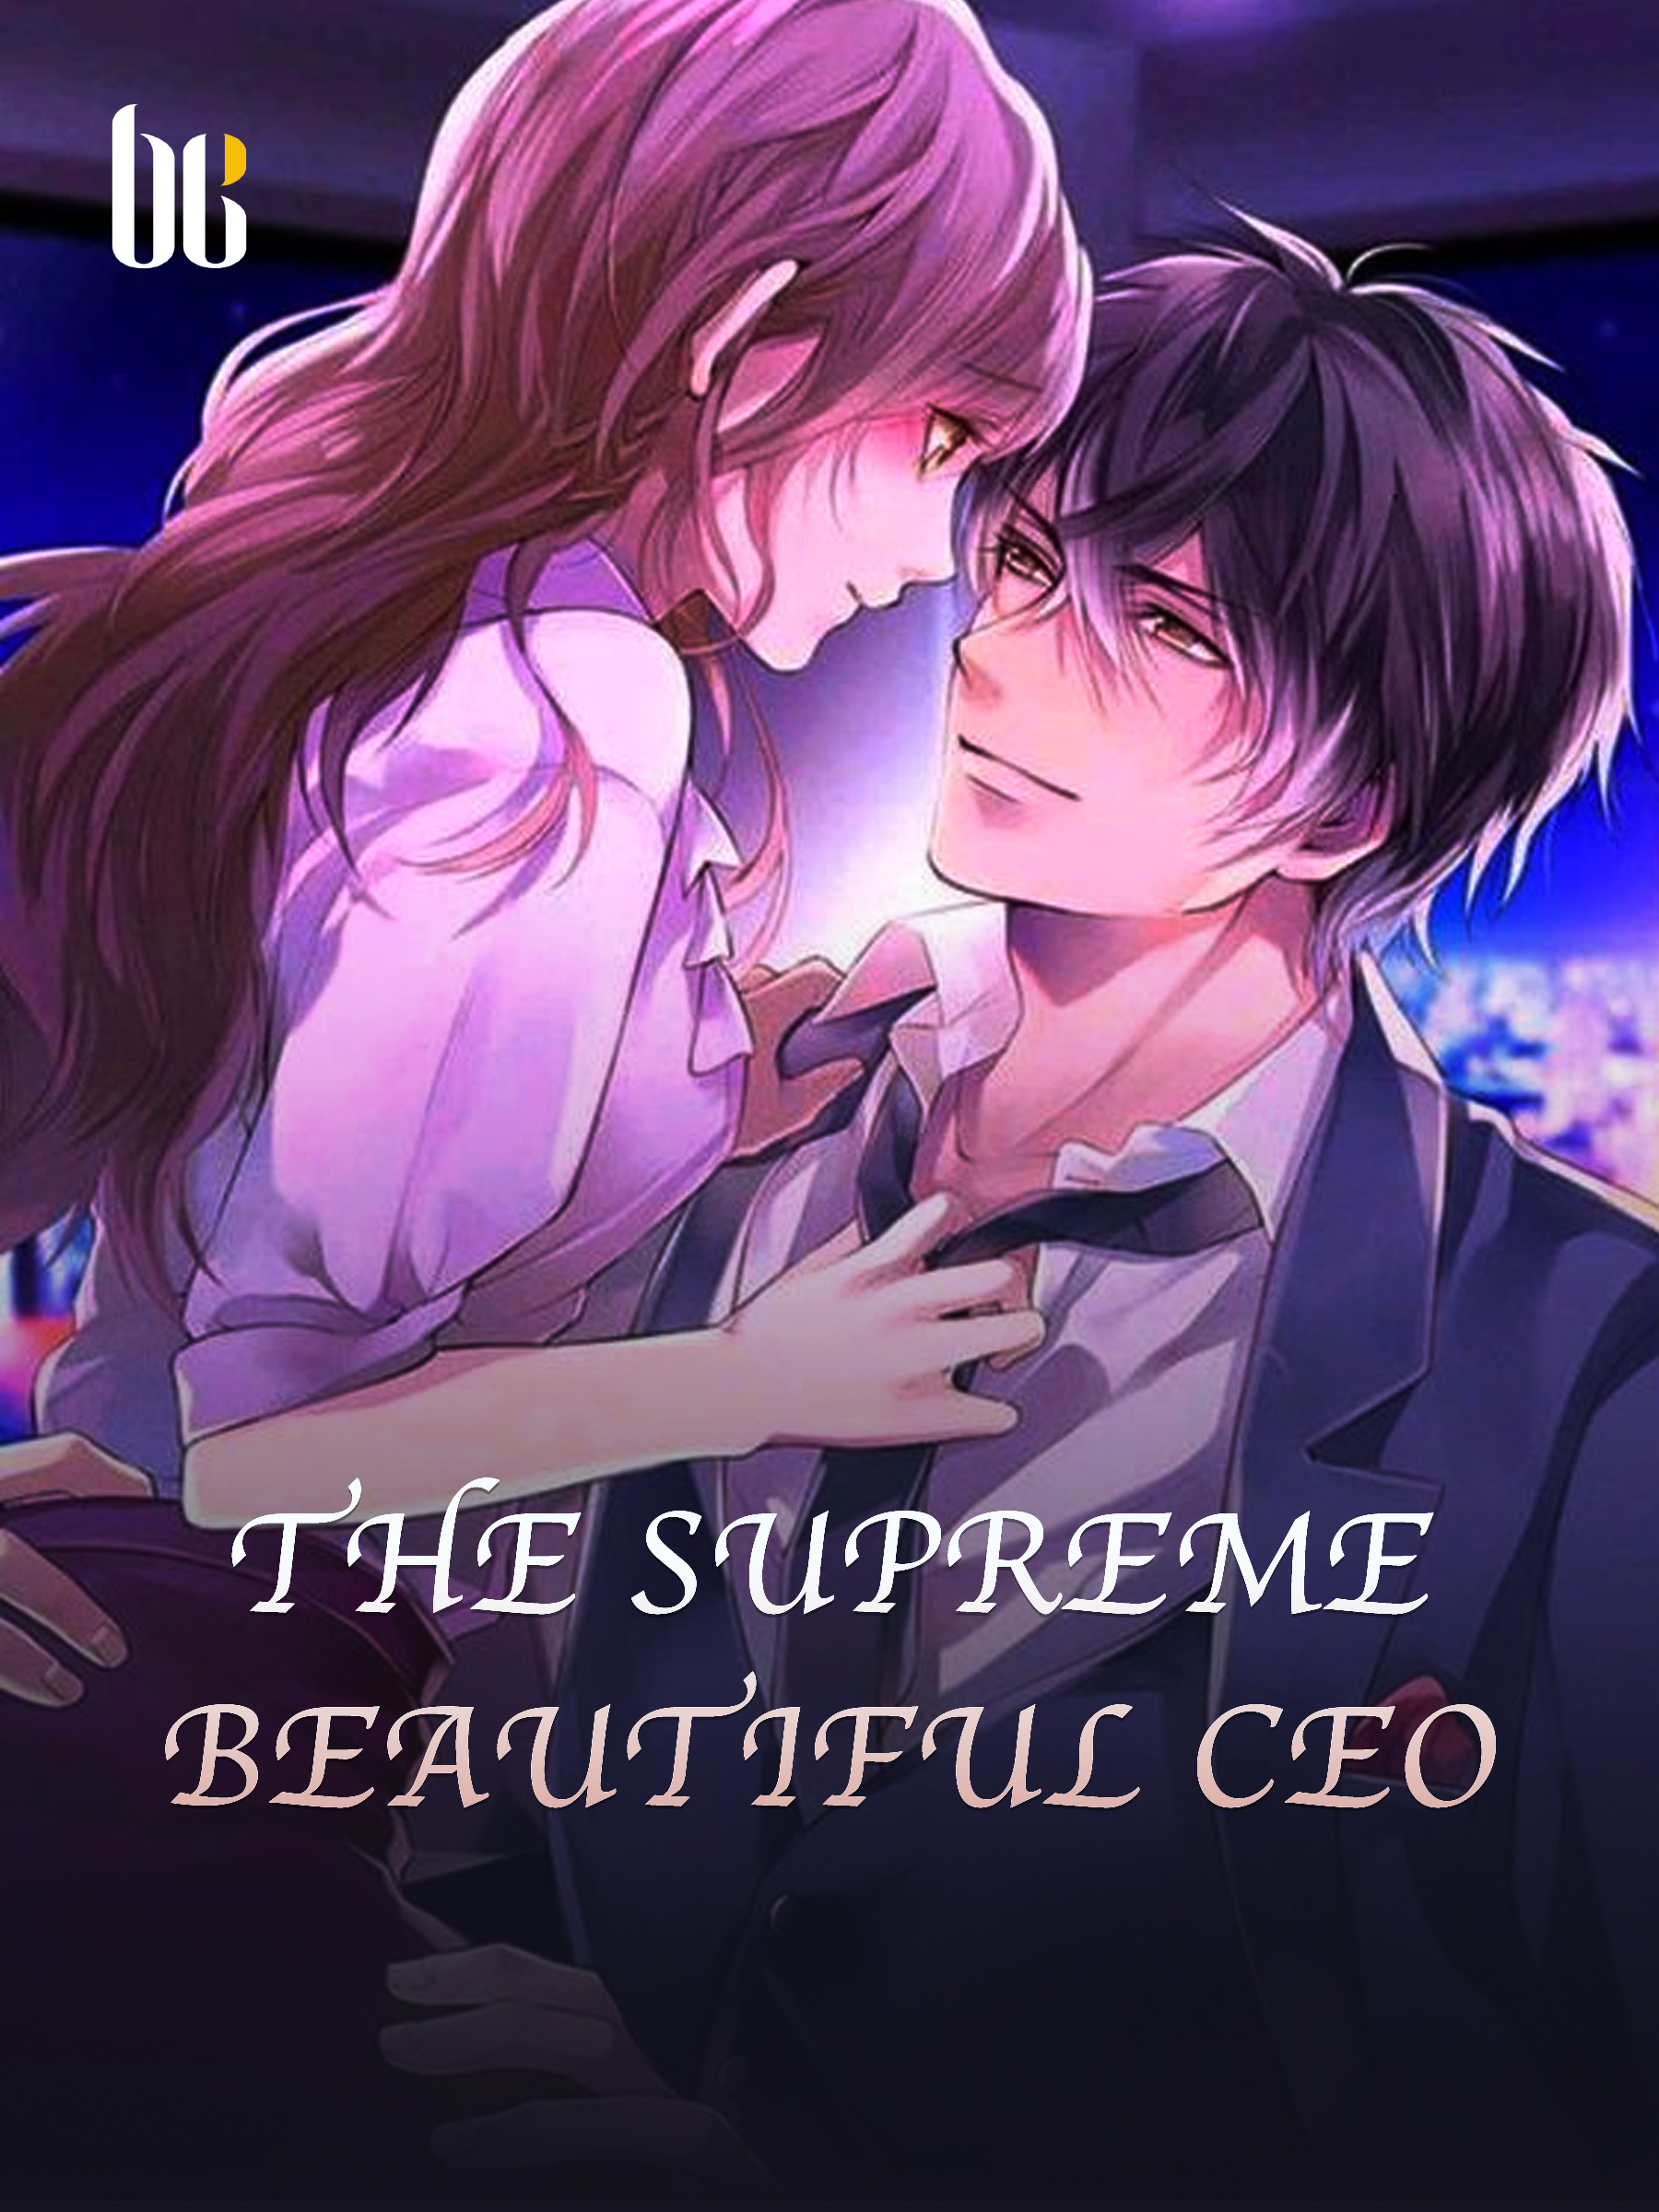 Top more than 133 ceo anime latest - awesomeenglish.edu.vn